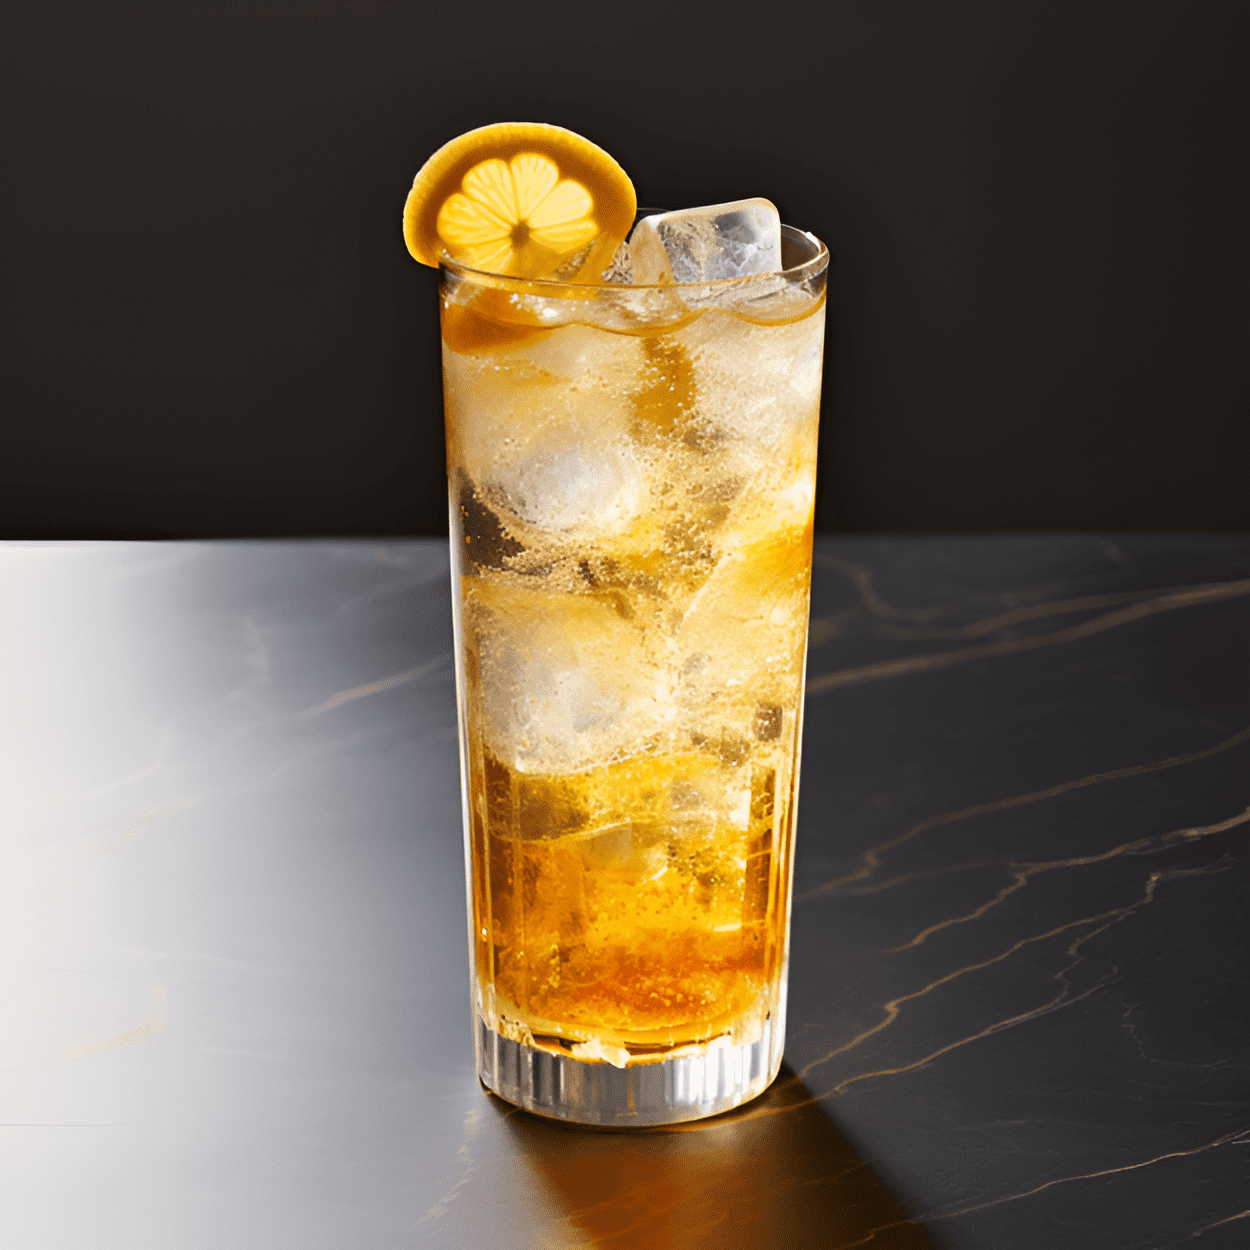 Tokyo Highball Cocktail Recipe - The Tokyo Highball is crisp, refreshing, and subtly sweet. The Japanese whiskey provides a smooth, rich base, while the soda water adds a bubbly effervescence. The hint of lemon gives it a refreshing citrus twist.